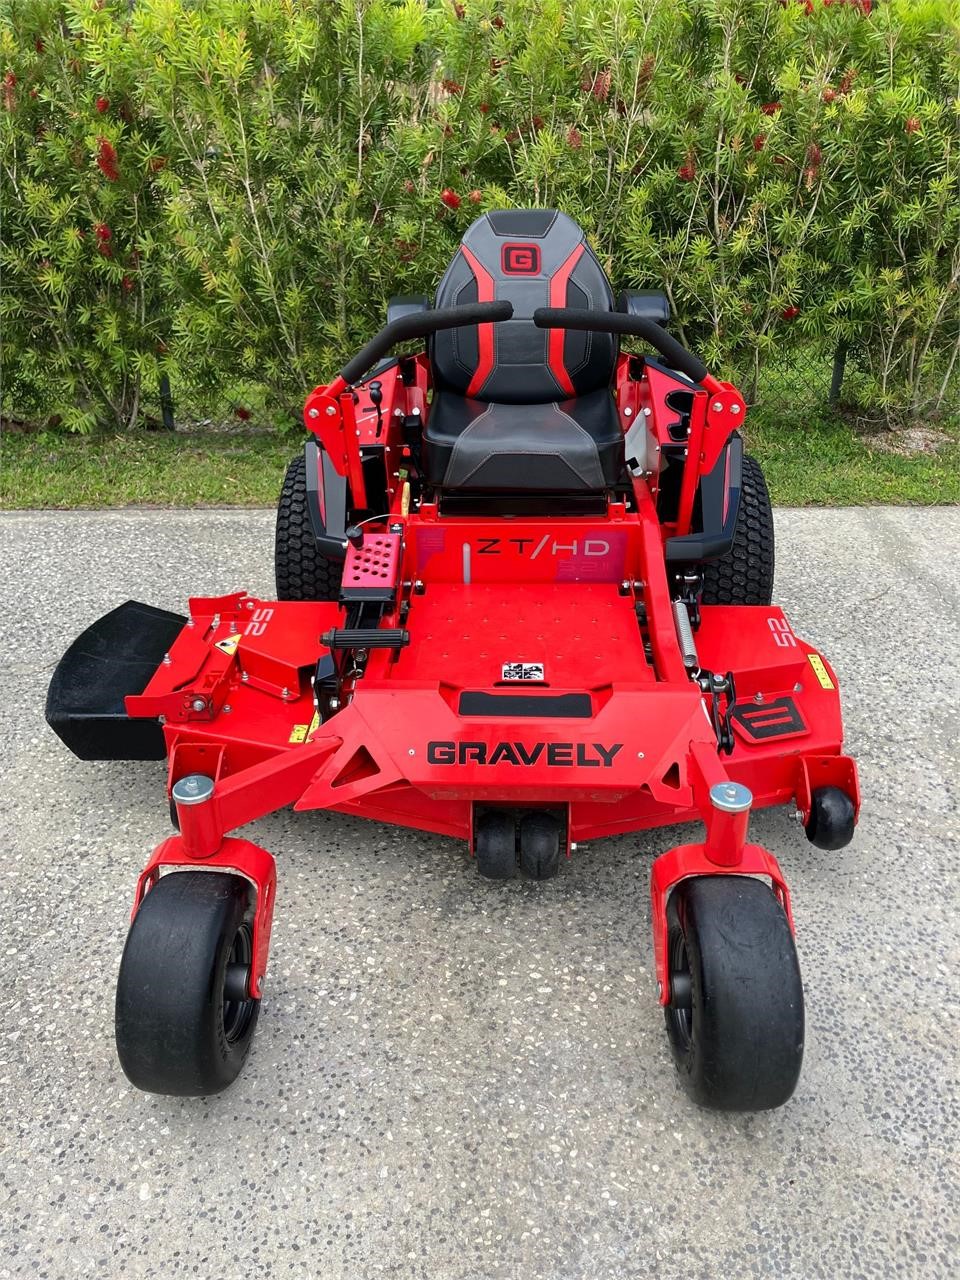 GRAVELY ZTHD "52" INCH 116-HOURS!